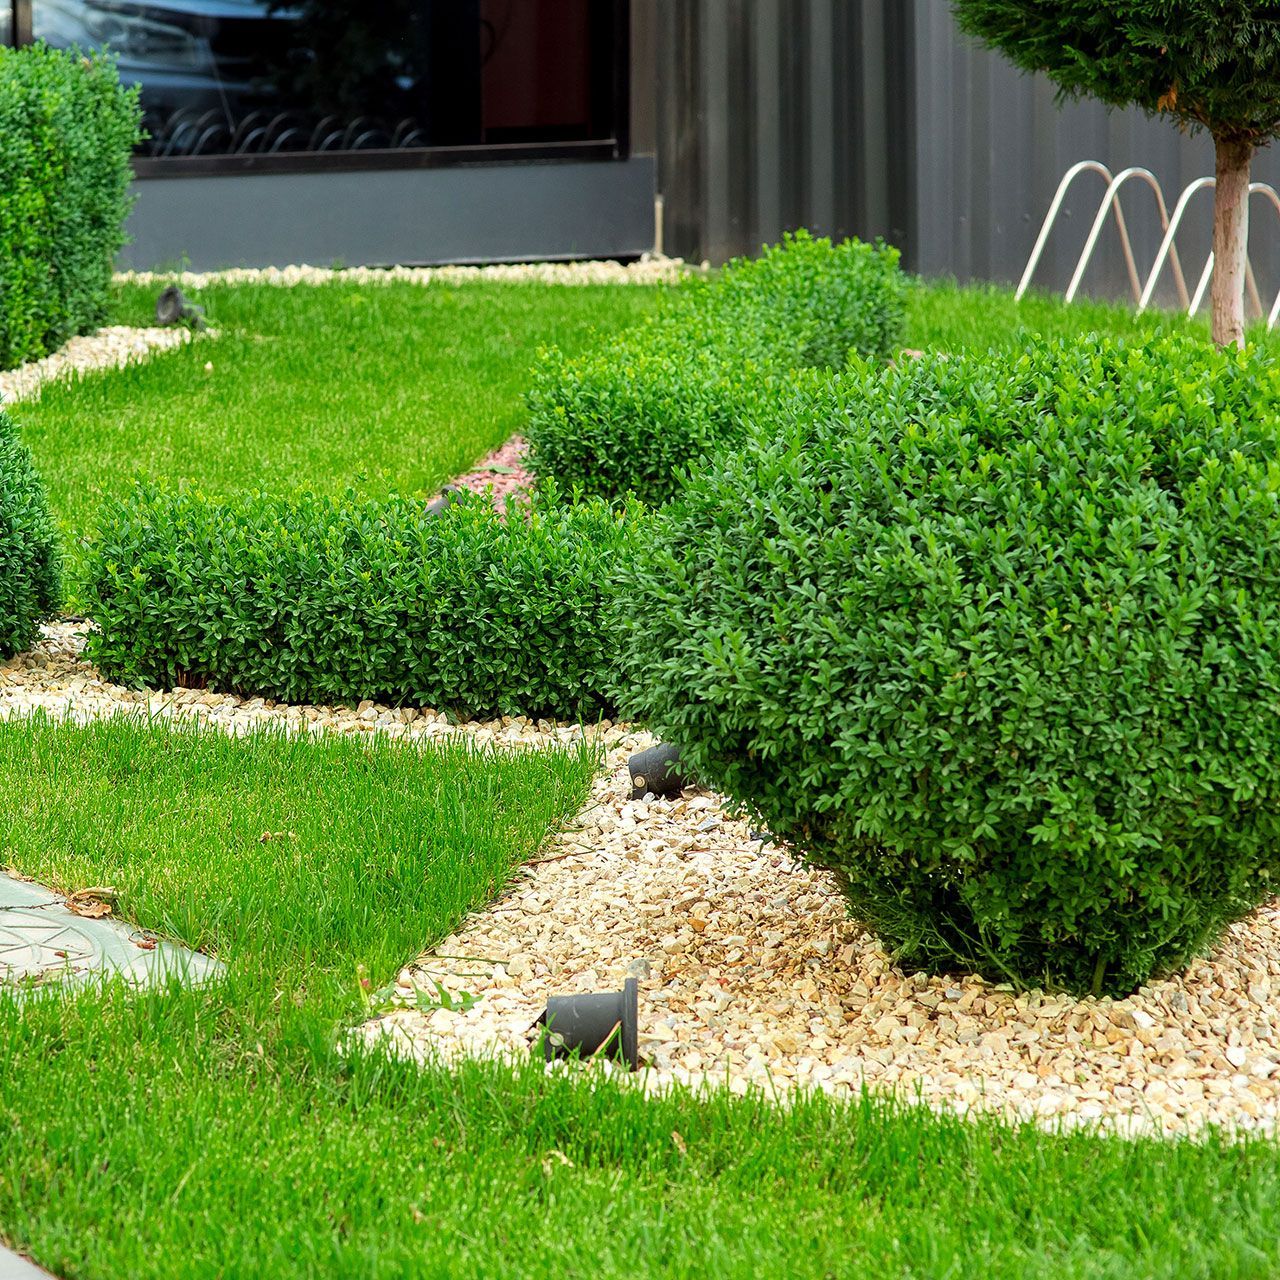 A lush green lawn with a few bushes and gravel.